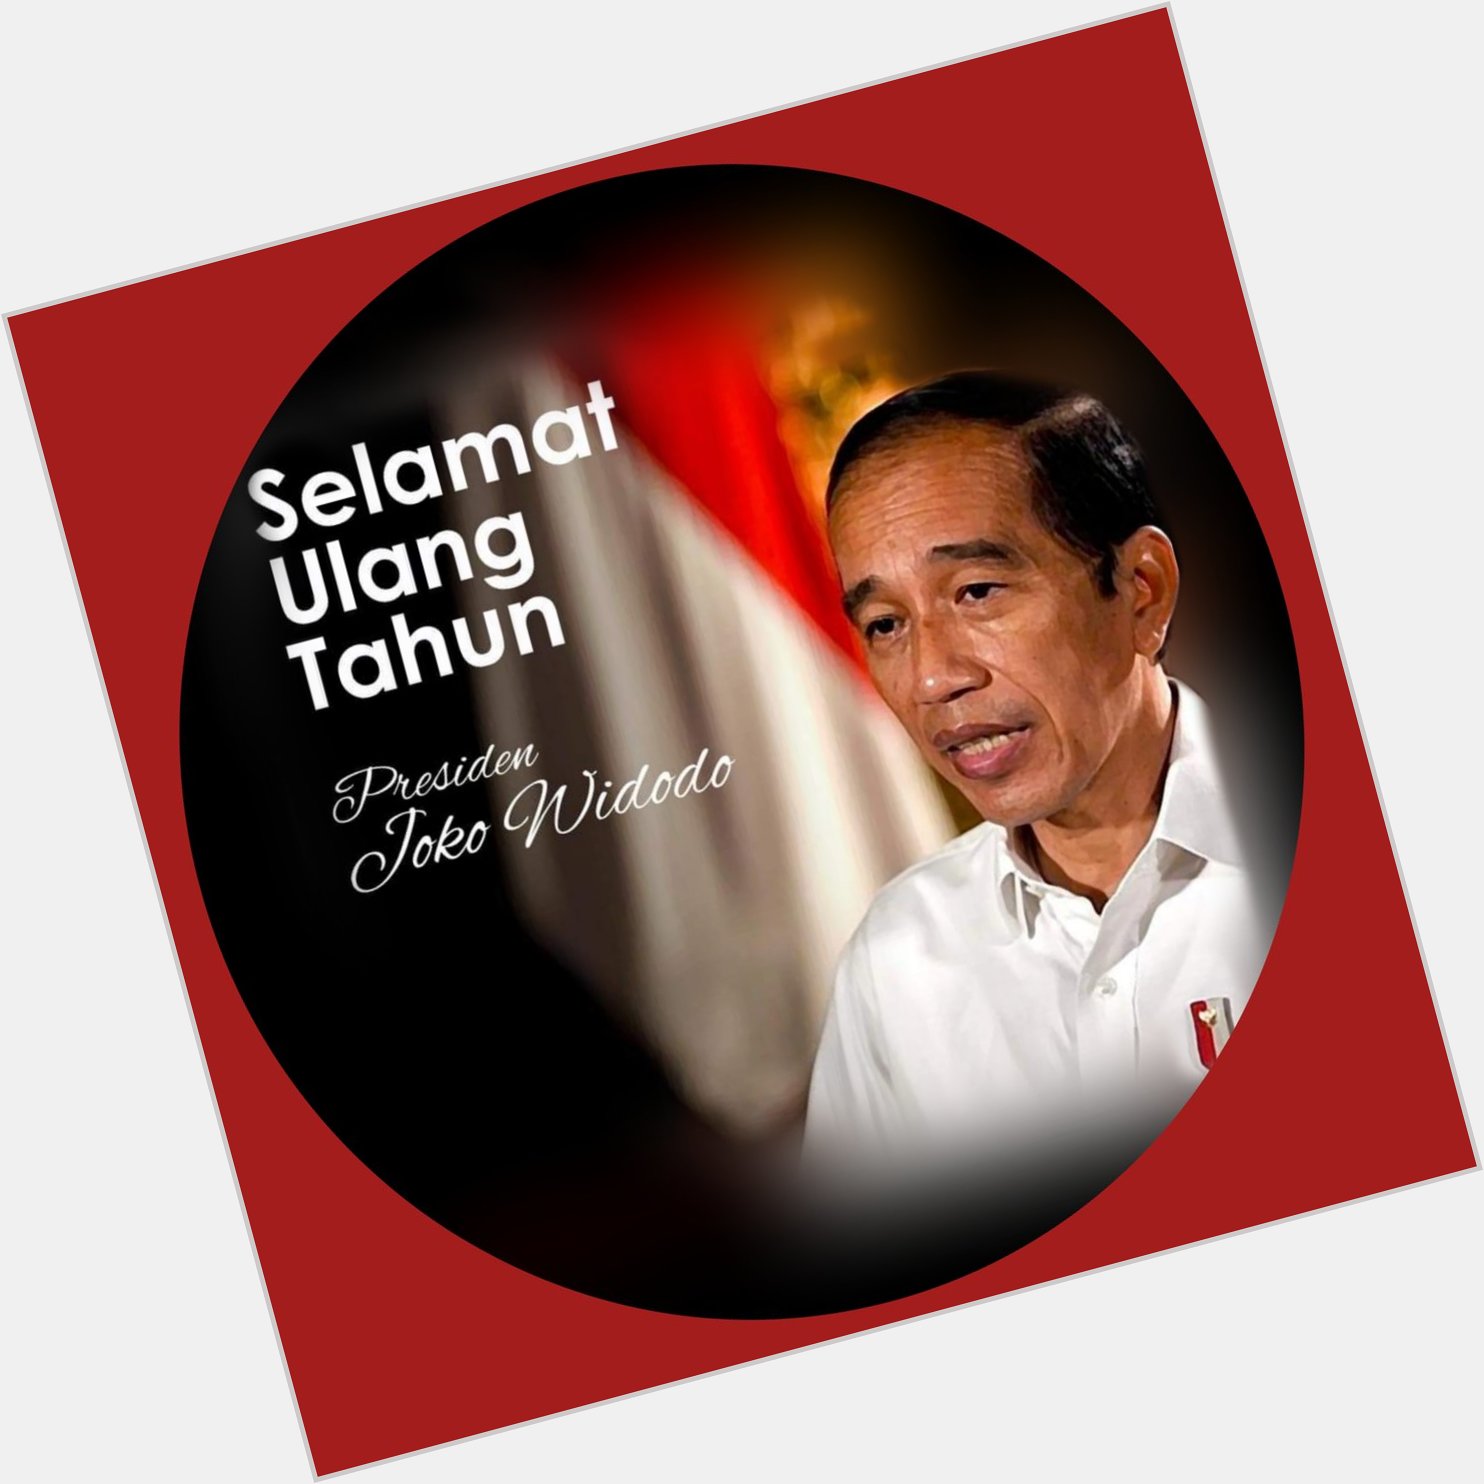 Happy 60th birthday, dear President Joko Widodo May God shower you with more blessings today and always. 